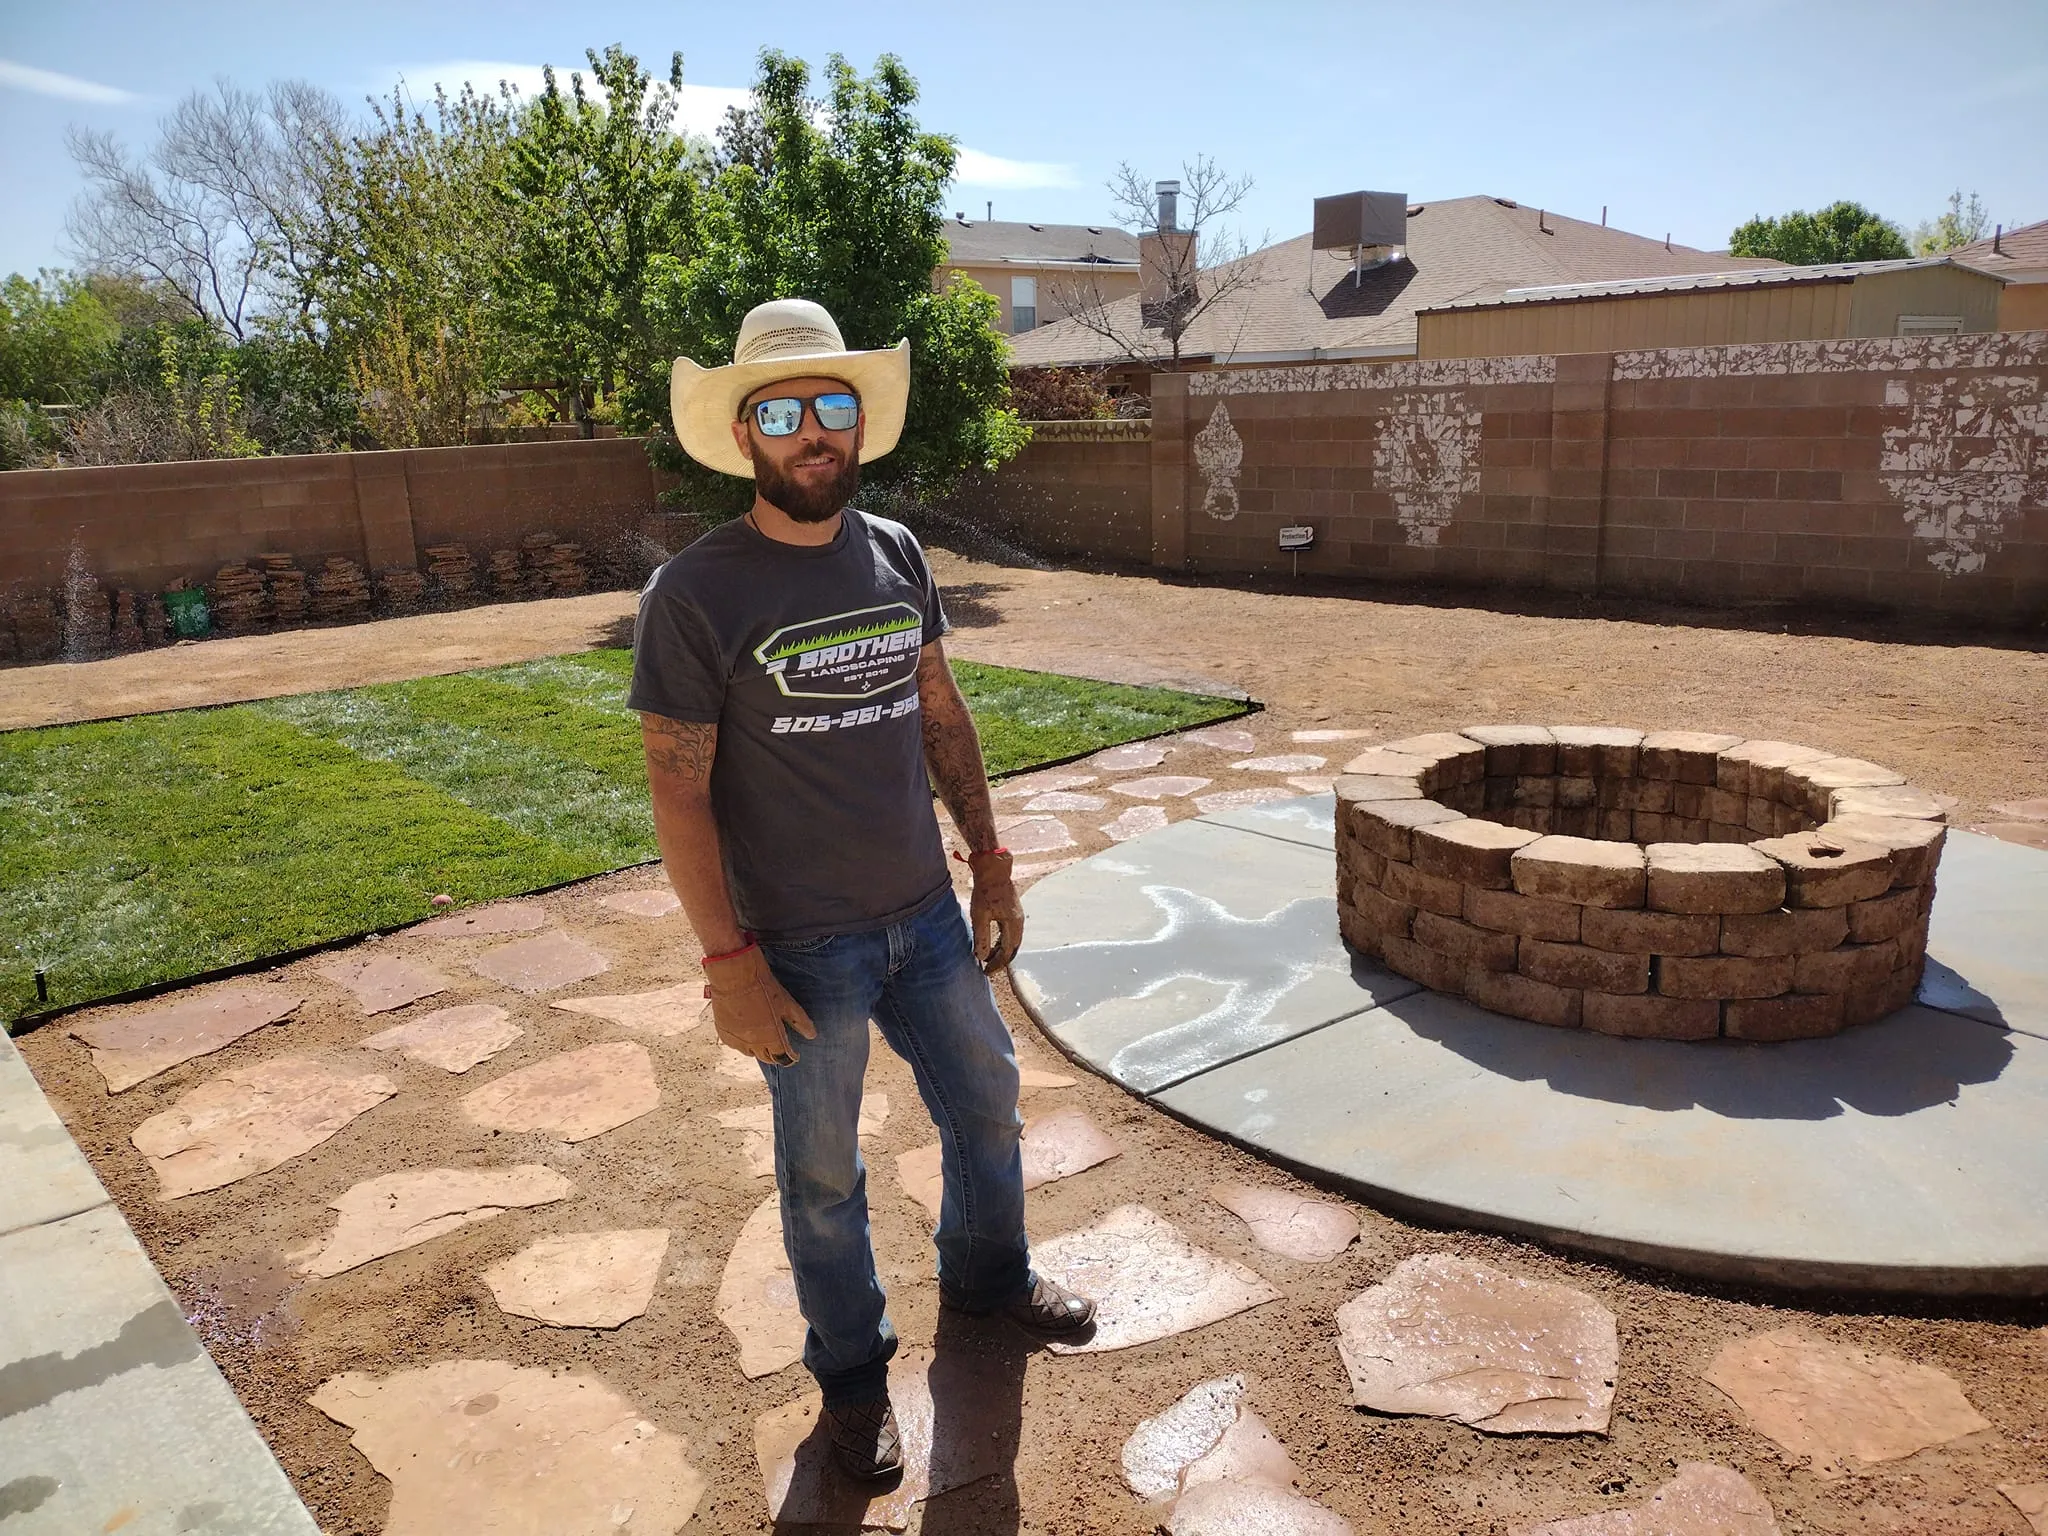 Residential Maintenance for 2 Brothers Landscaping in Albuquerque, NM